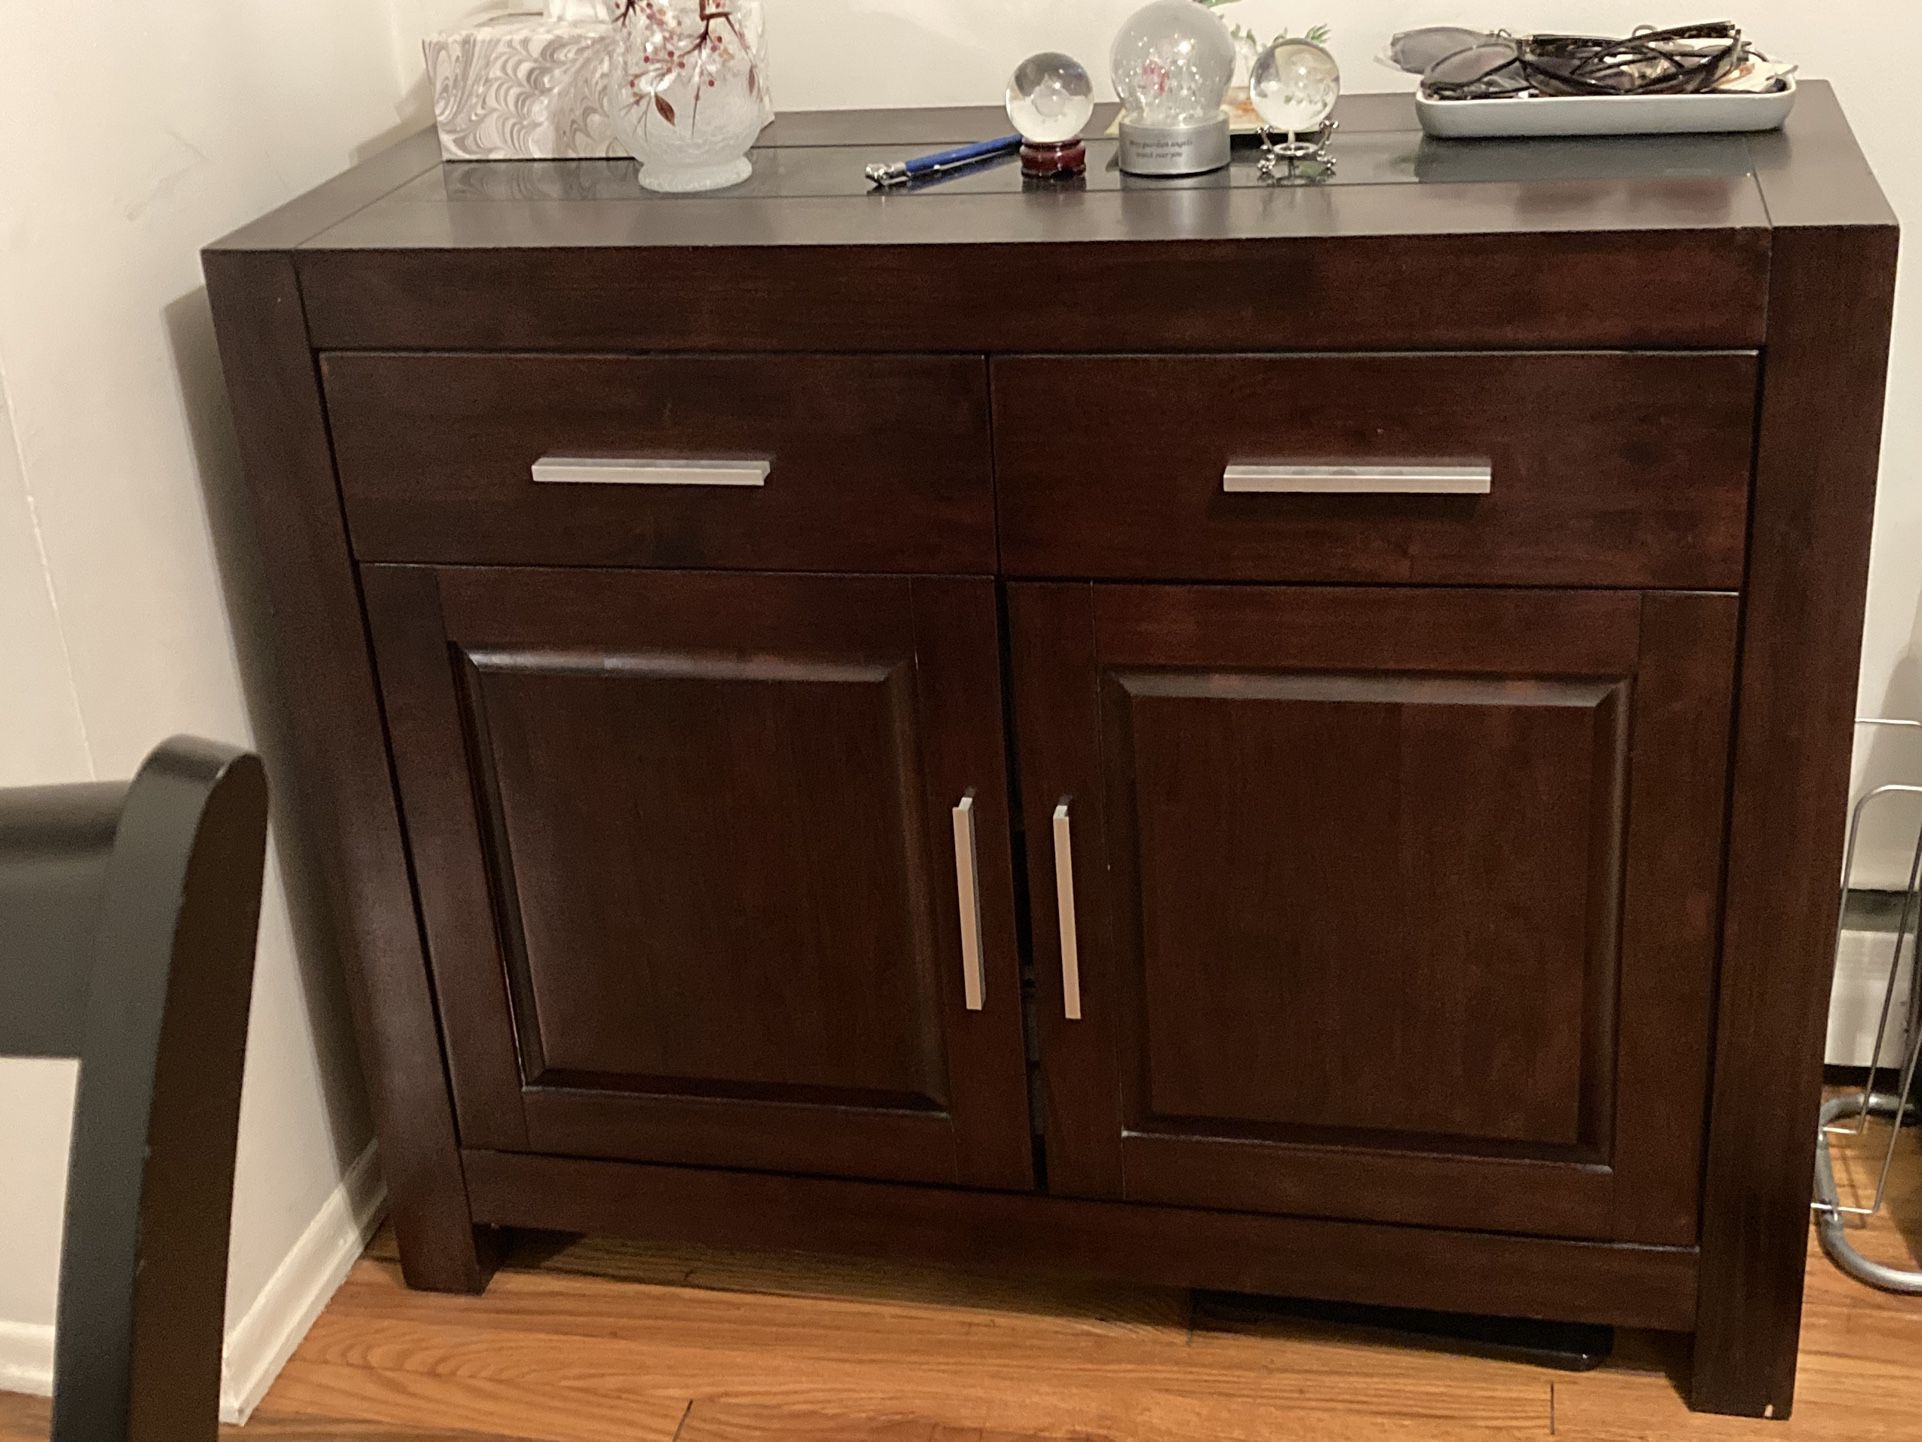 Dresser with pull out draws and shelves